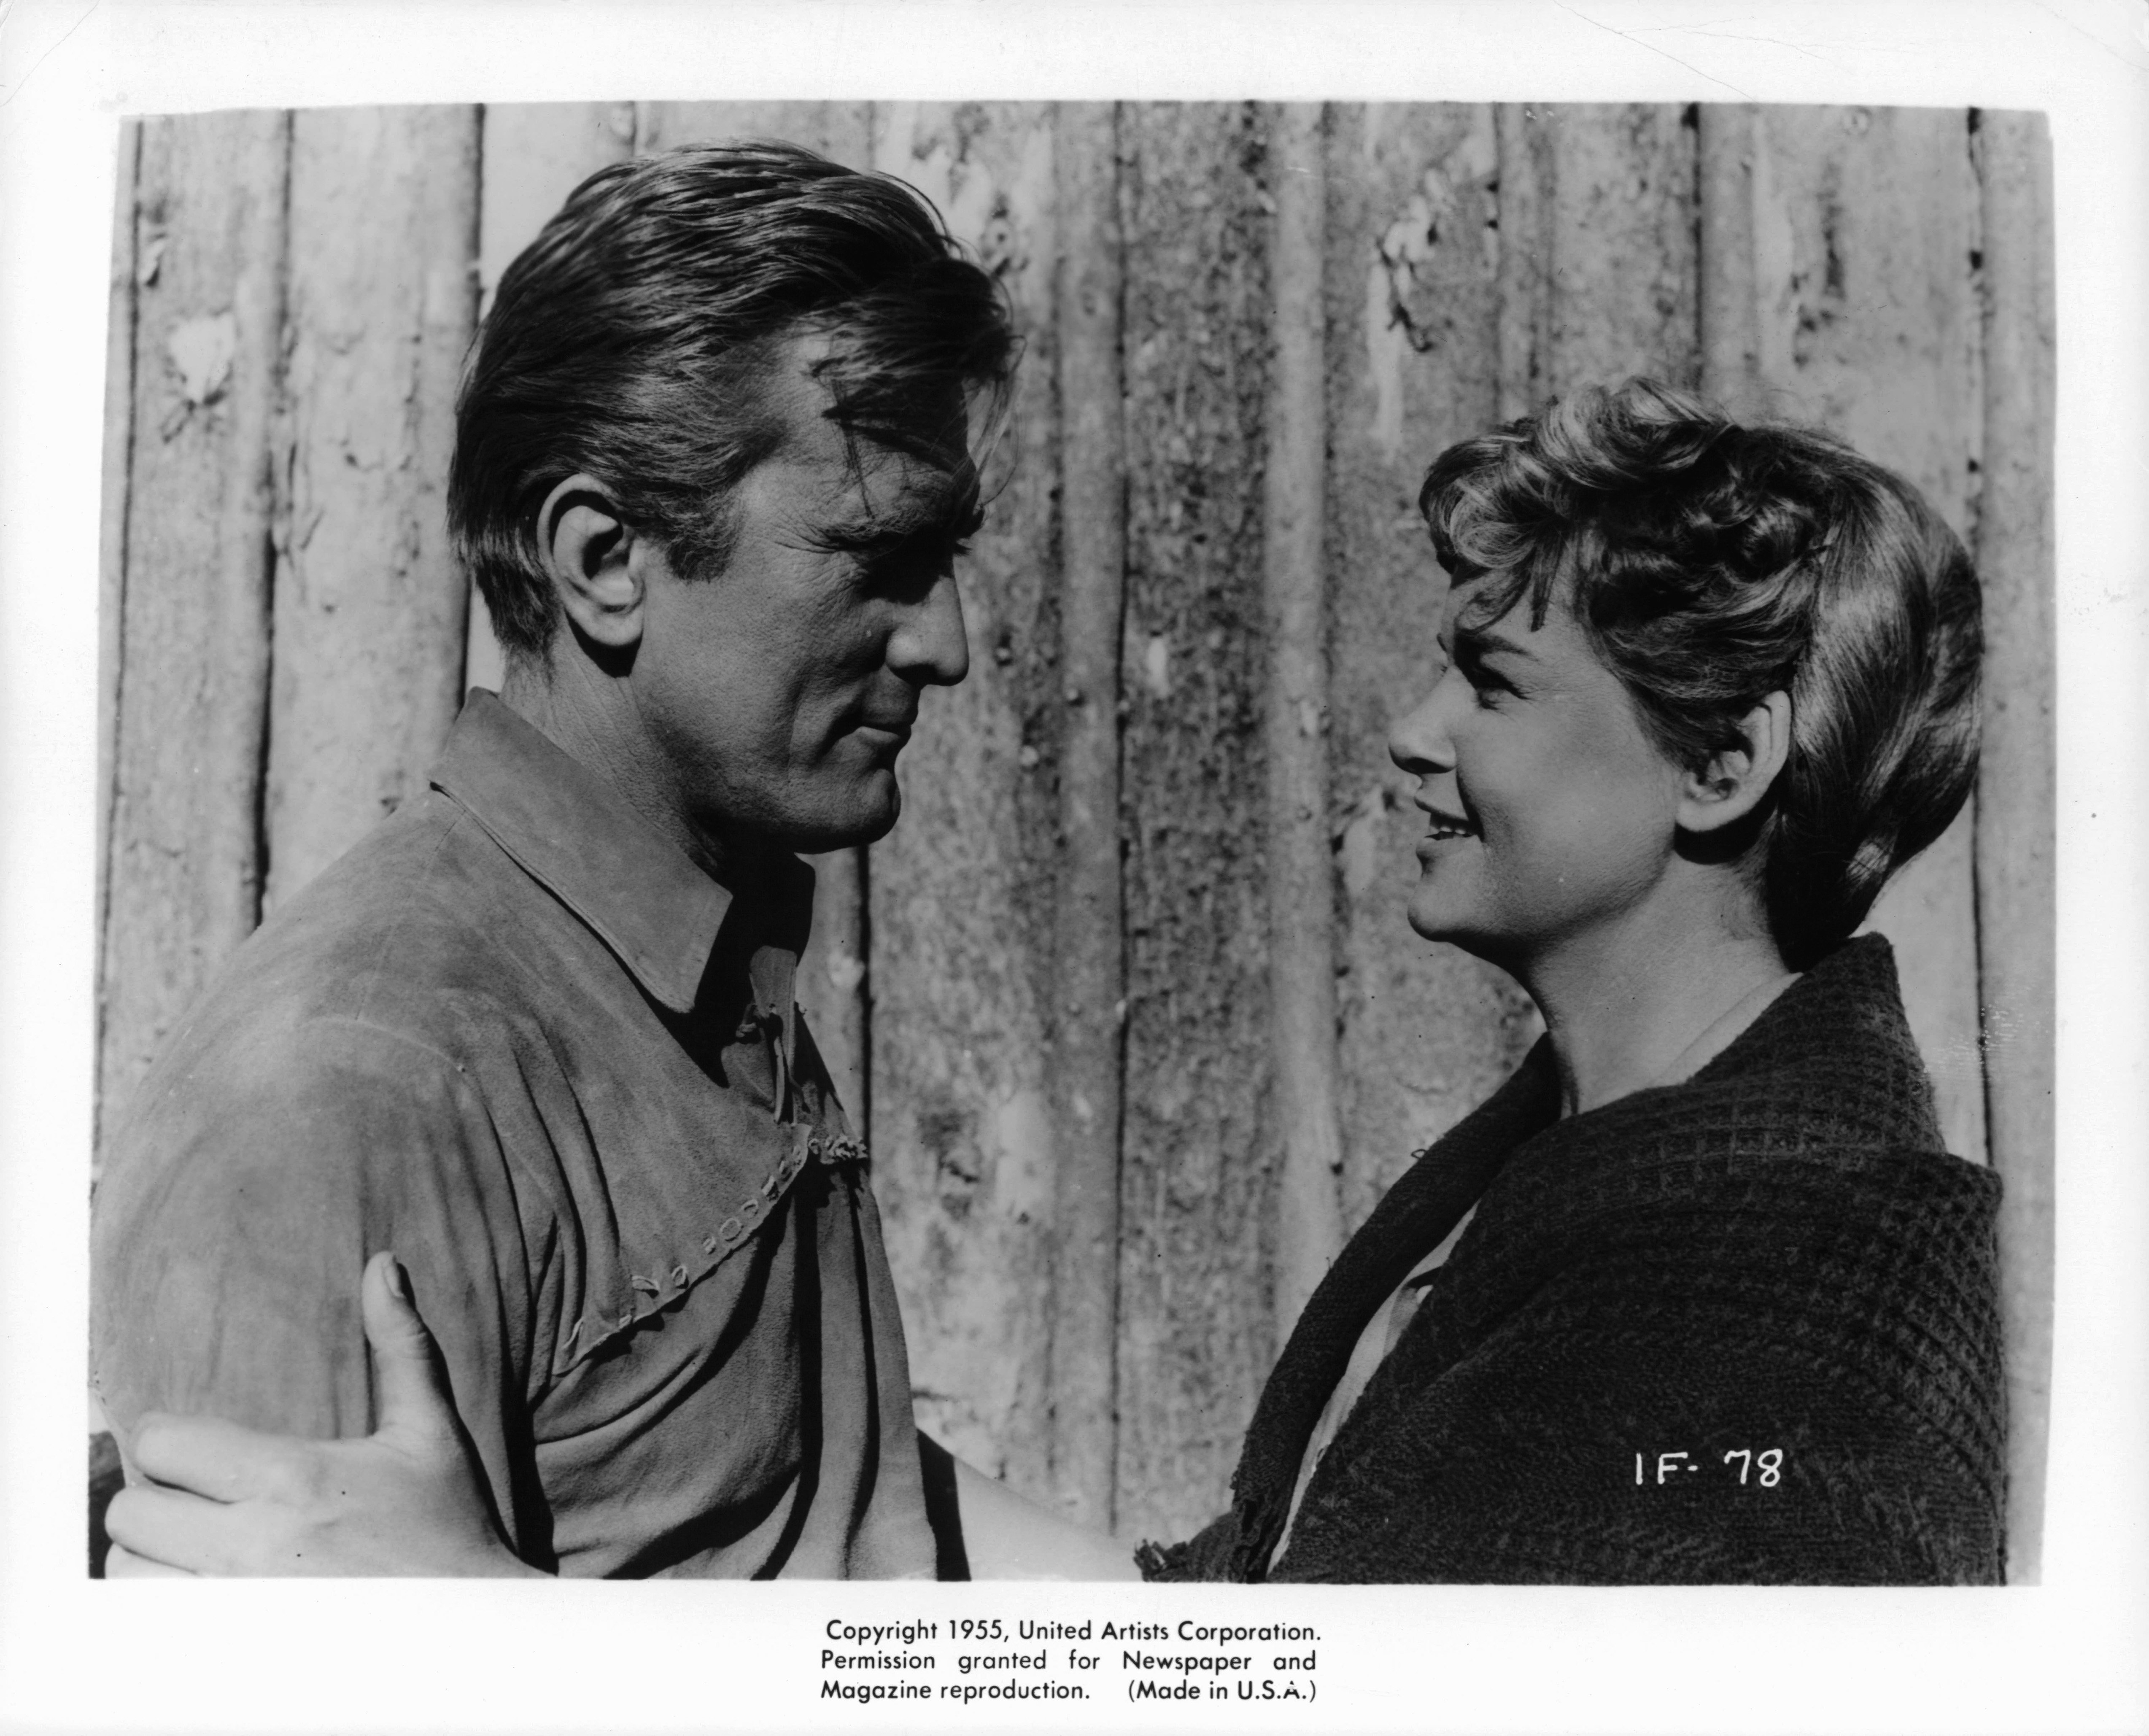 Kirk Douglas looks to Diana Douglas in a scene from the film "The Indian Fighter," circa 1955. | Photo: Getty Images